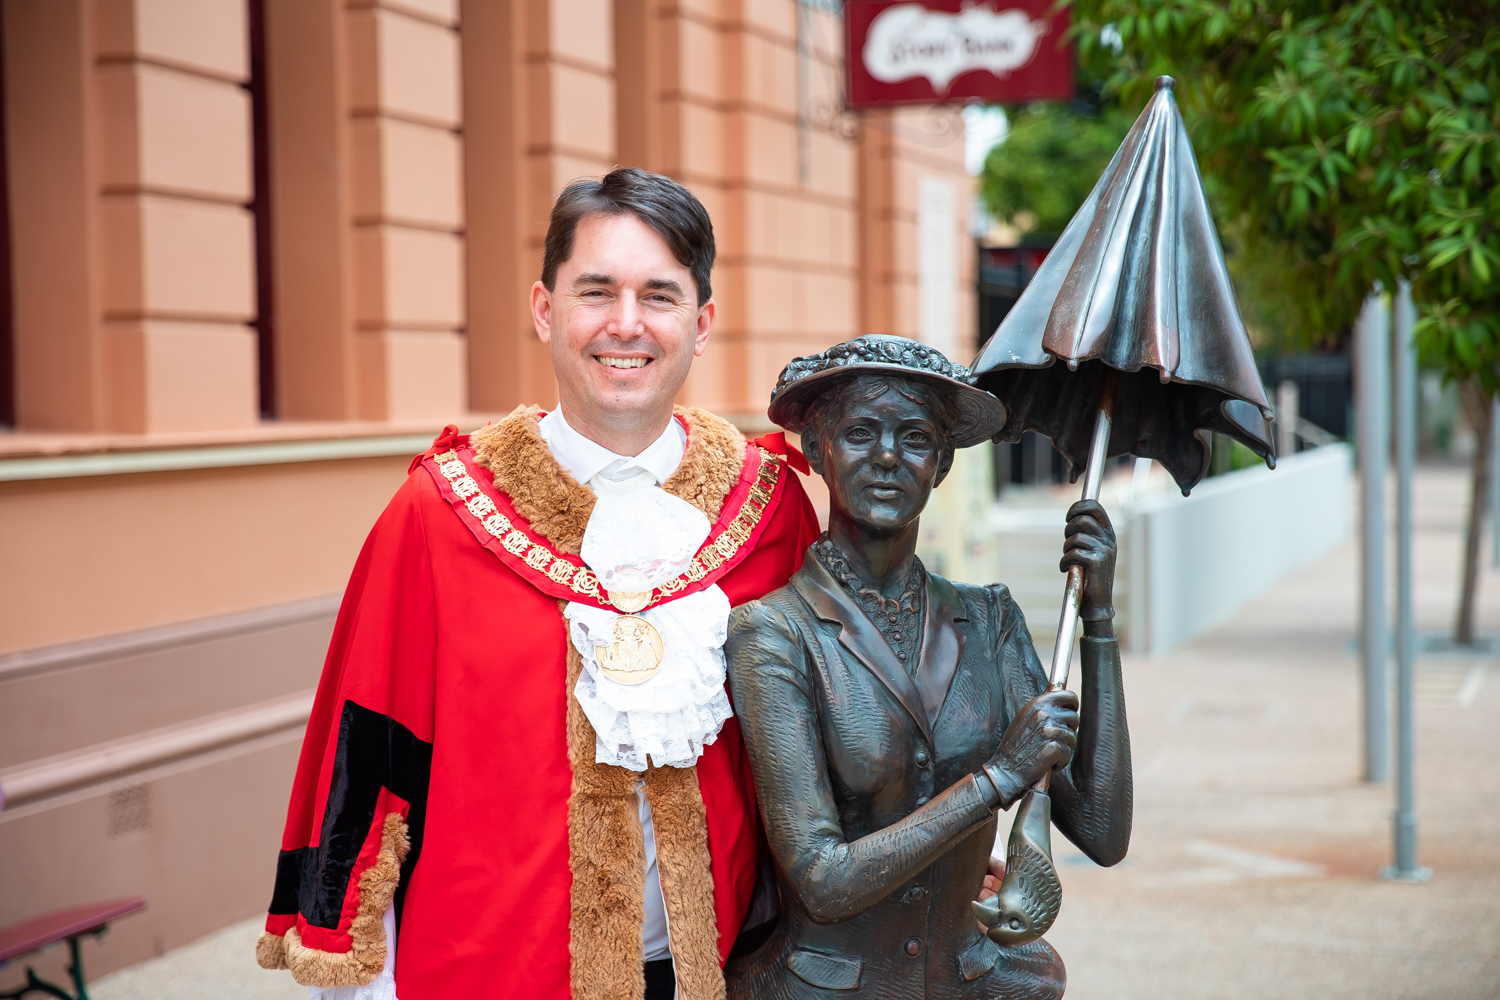 Fraser Coast Mayor George Seymour poses with Mary Poppins Statue